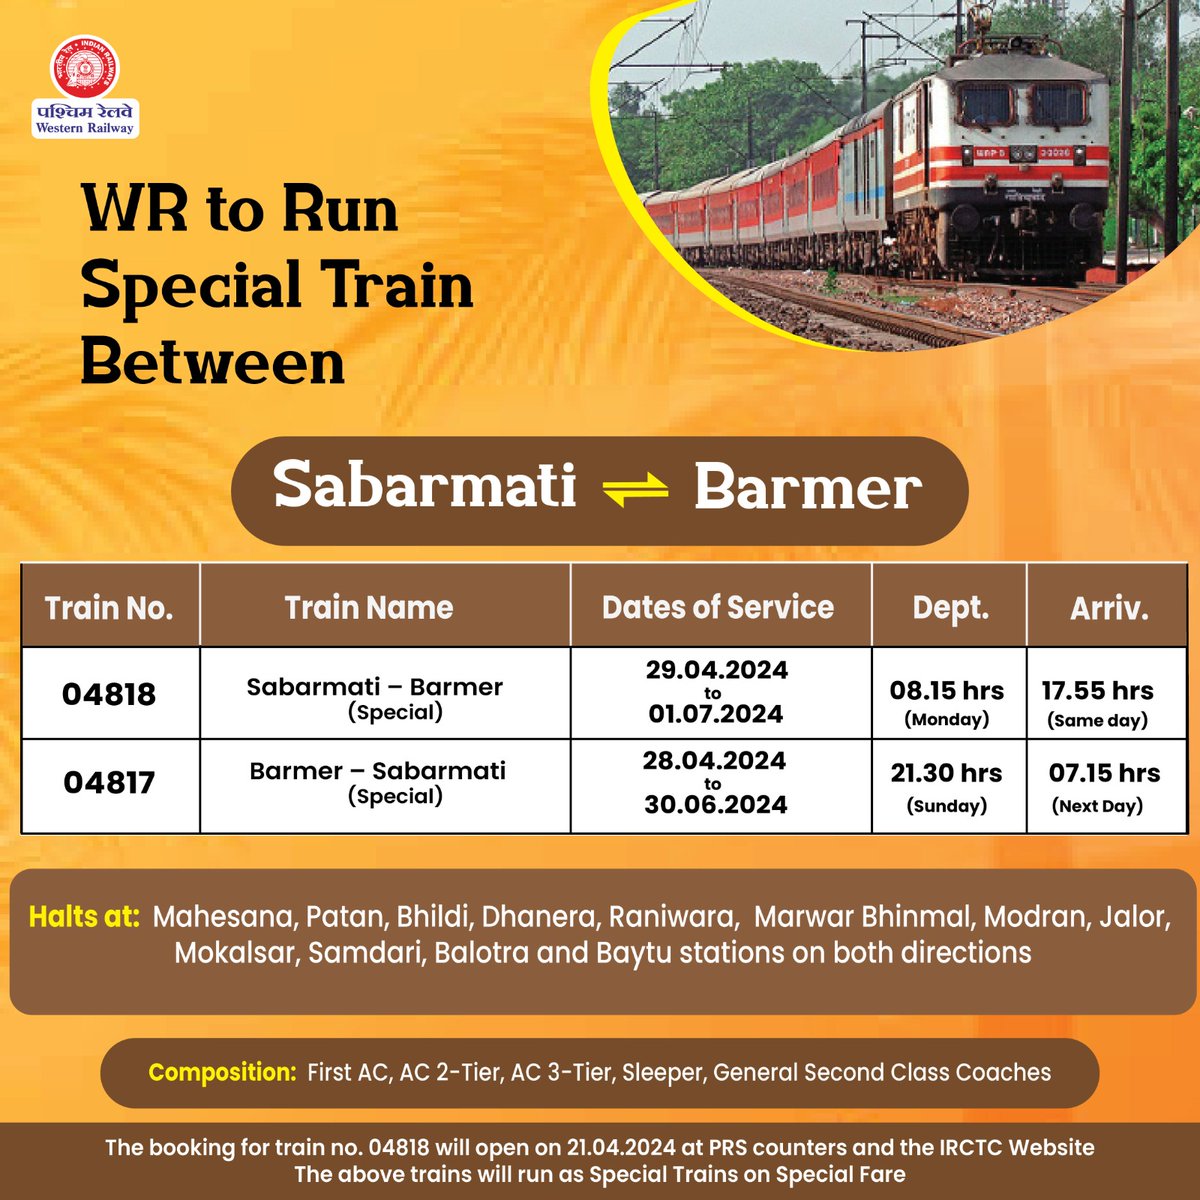 For the convenience of passengers and to meet the travel demand, WR has decided to run 04818/17 Sabarmati - Barmer Special The booking for Train No. 04818 will open on 21.04.2024 at PRS Counters and the IRCTC Website. #WRUpdates